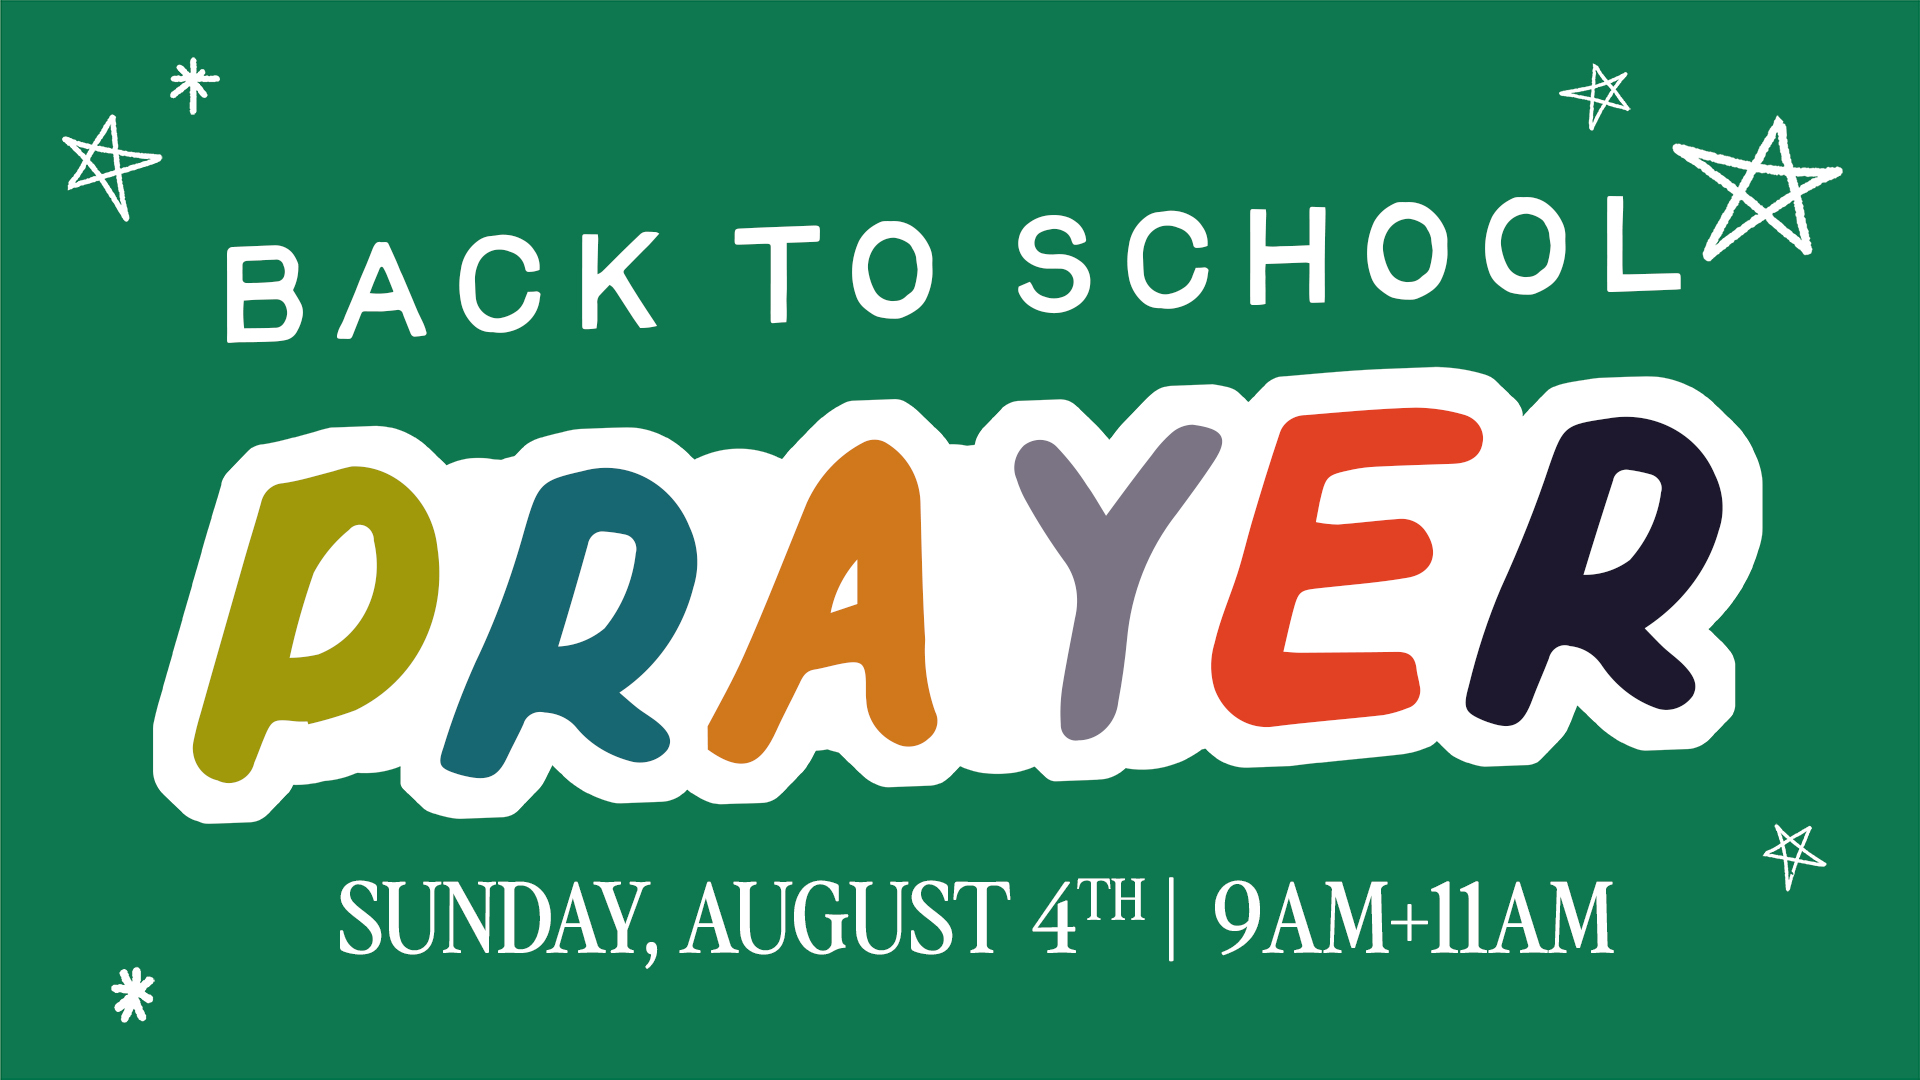 Back to School Prayer at the Braselton campus